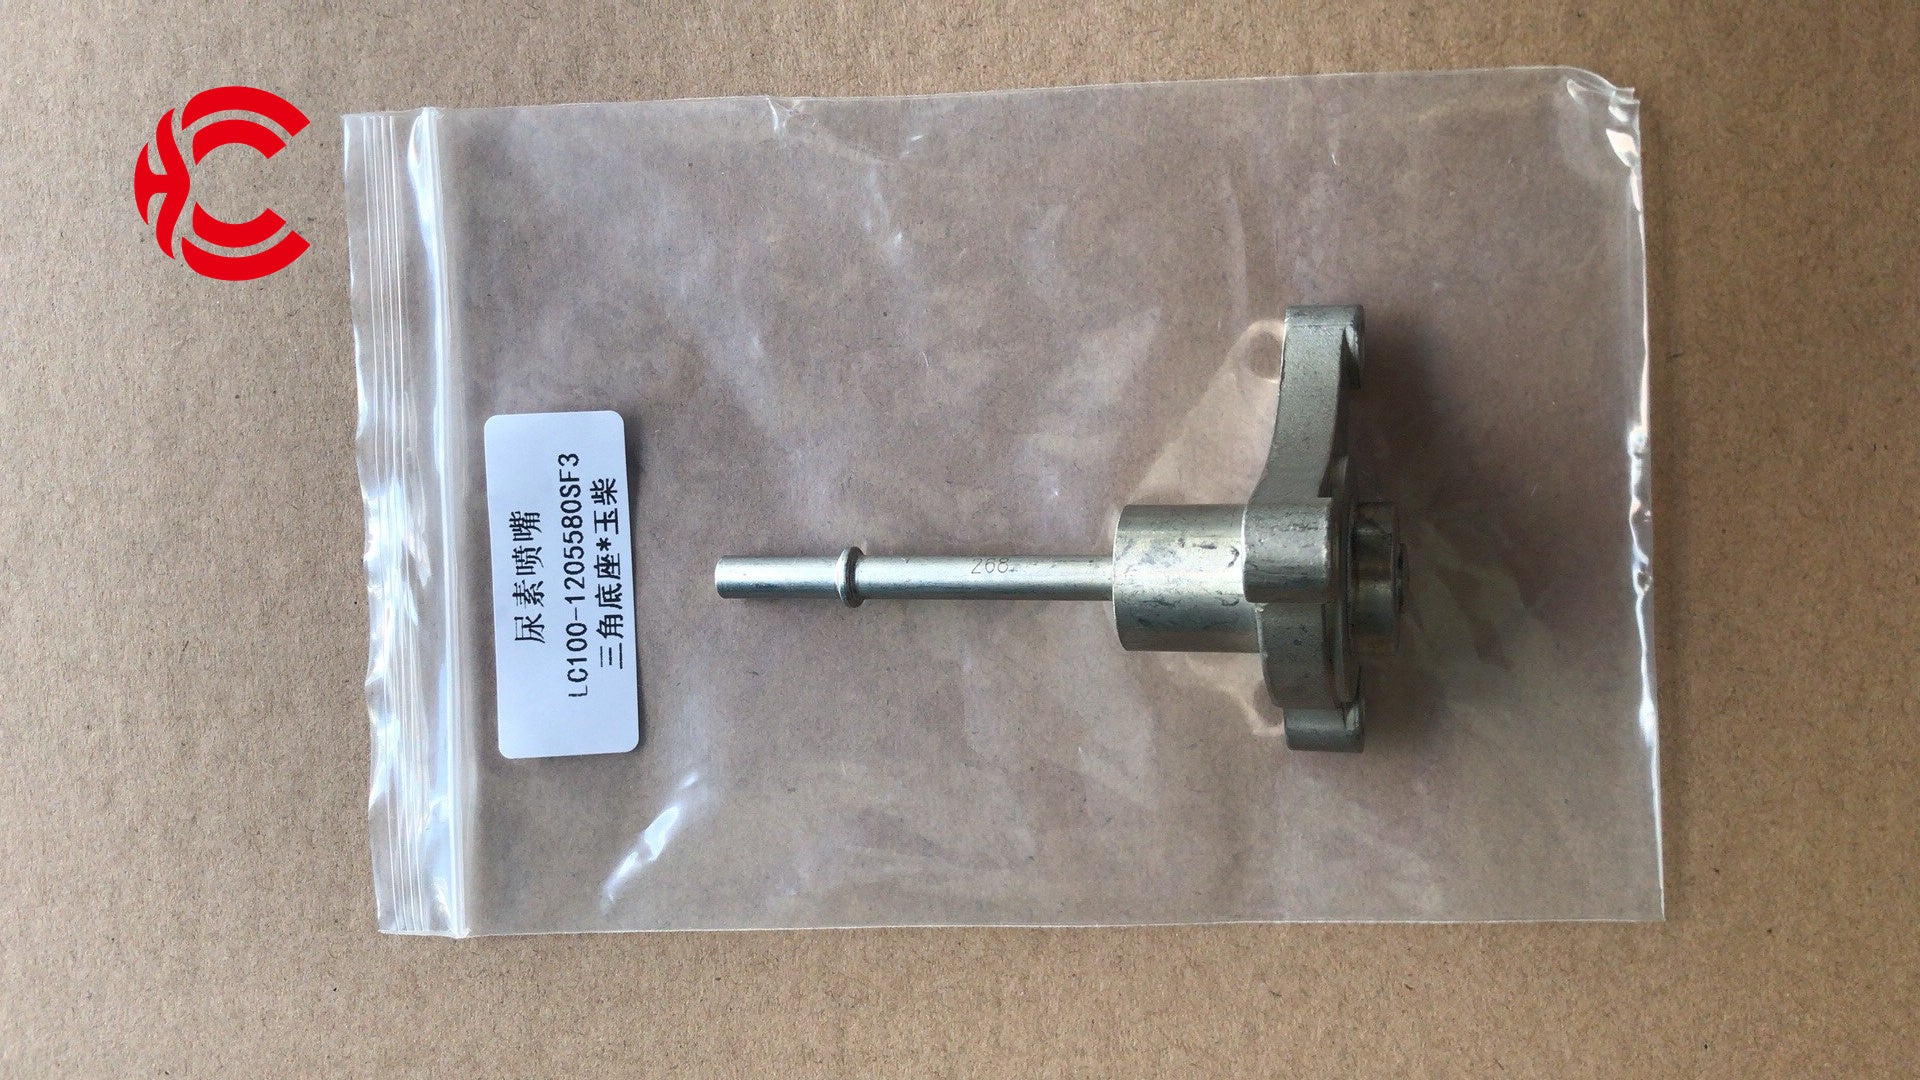 OEM: LC100-1205580SF3Material: MetalColor: SilverOrigin: Made in ChinaWeight: 200gPacking List: 1* Adblue/Urea Nozzle More ServiceWe can provide OEM Manufacturing serviceWe can Be your one-step solution for Auto PartsWe can provide technical scheme for you Feel Free to Contact Us, We will get back to you as soon as possible.